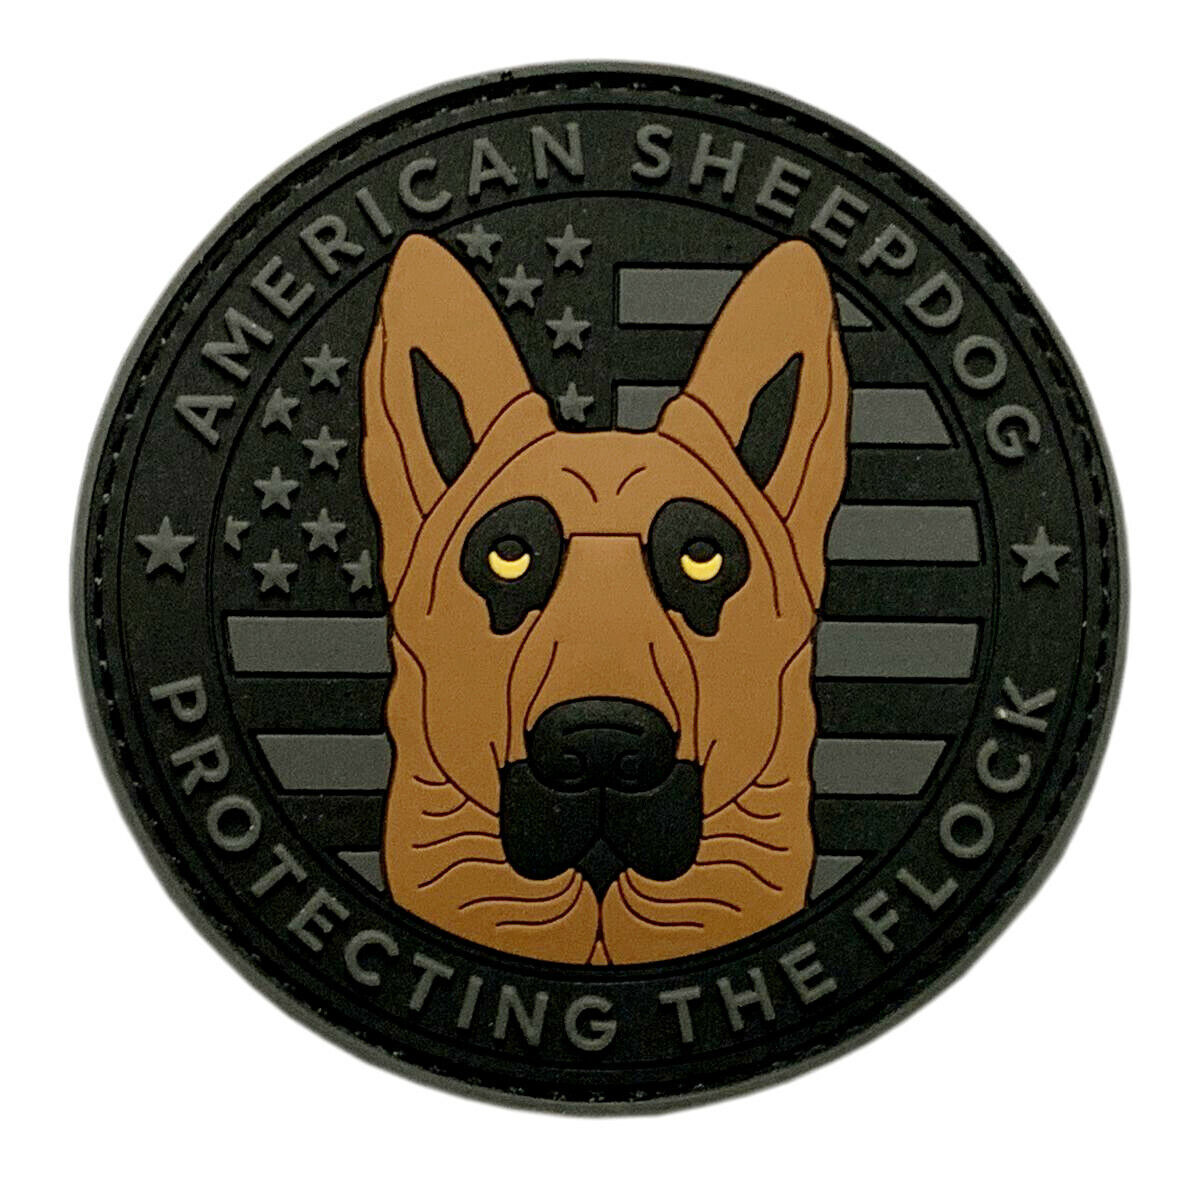 American Sheepdog K-9 USA Flag Protecting The Flock Patch [3-D PVC Rubber-D6]